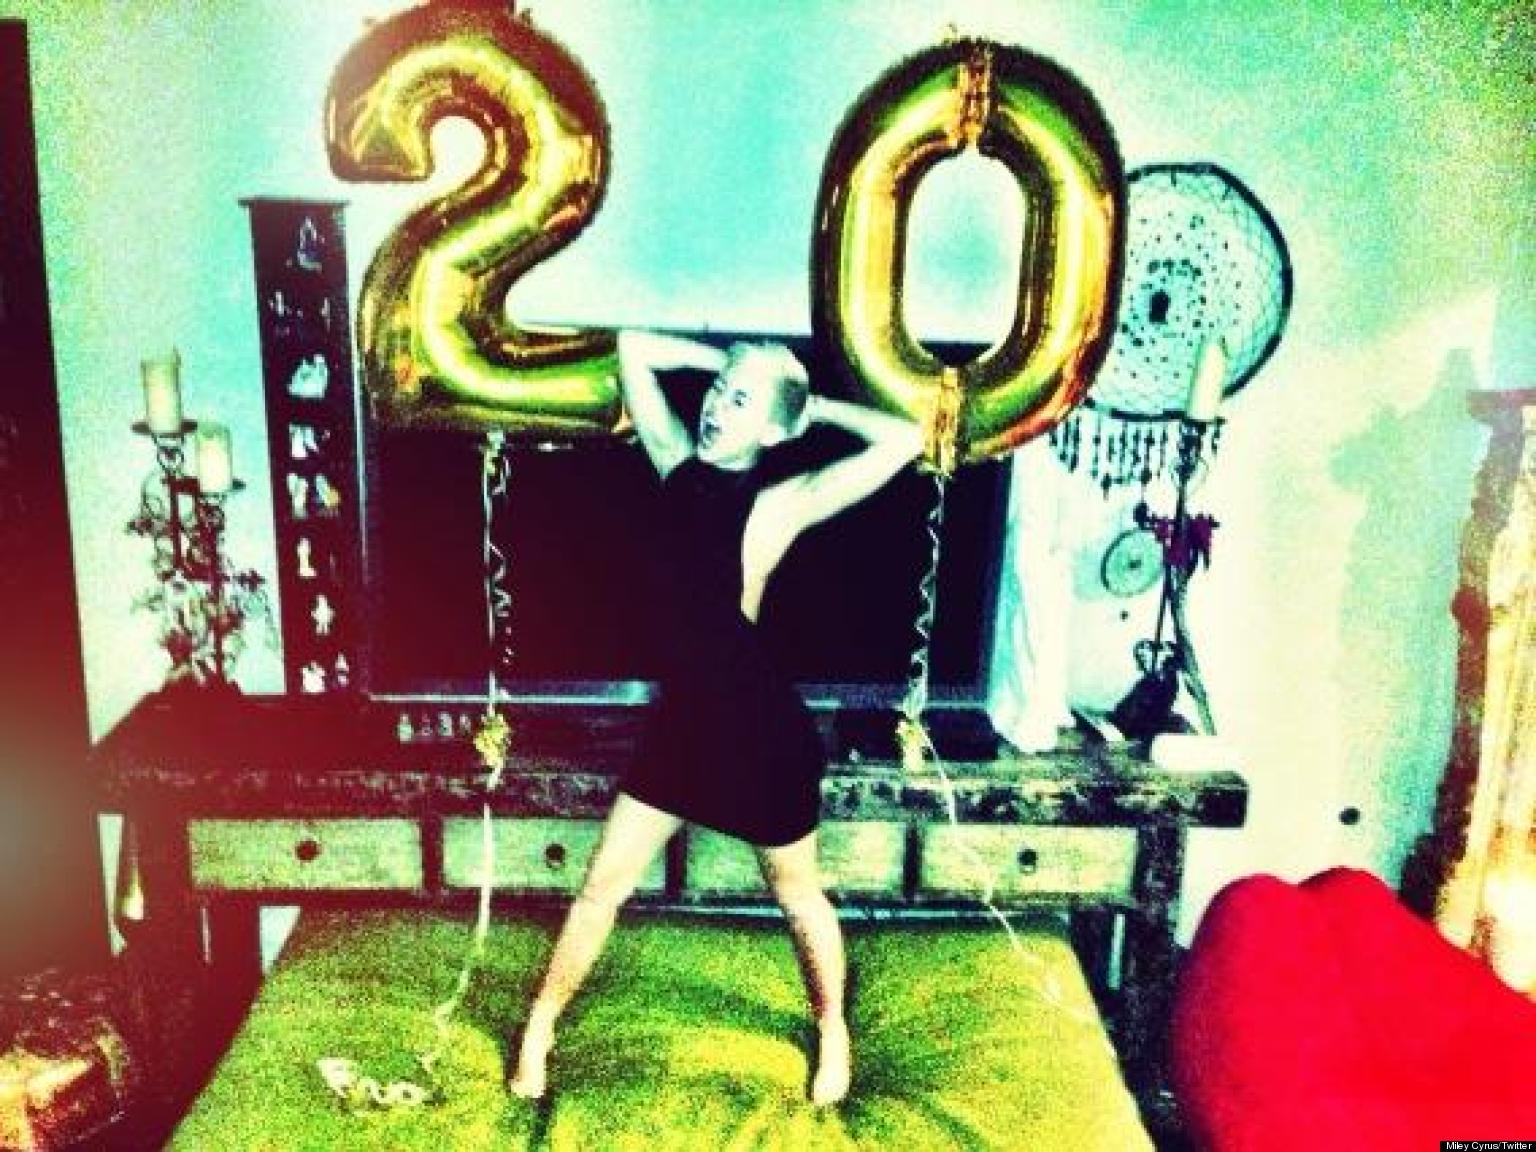 Miley Cyrus' Birthday: Singer Rings In 20th Birthday In Style (PHOTO